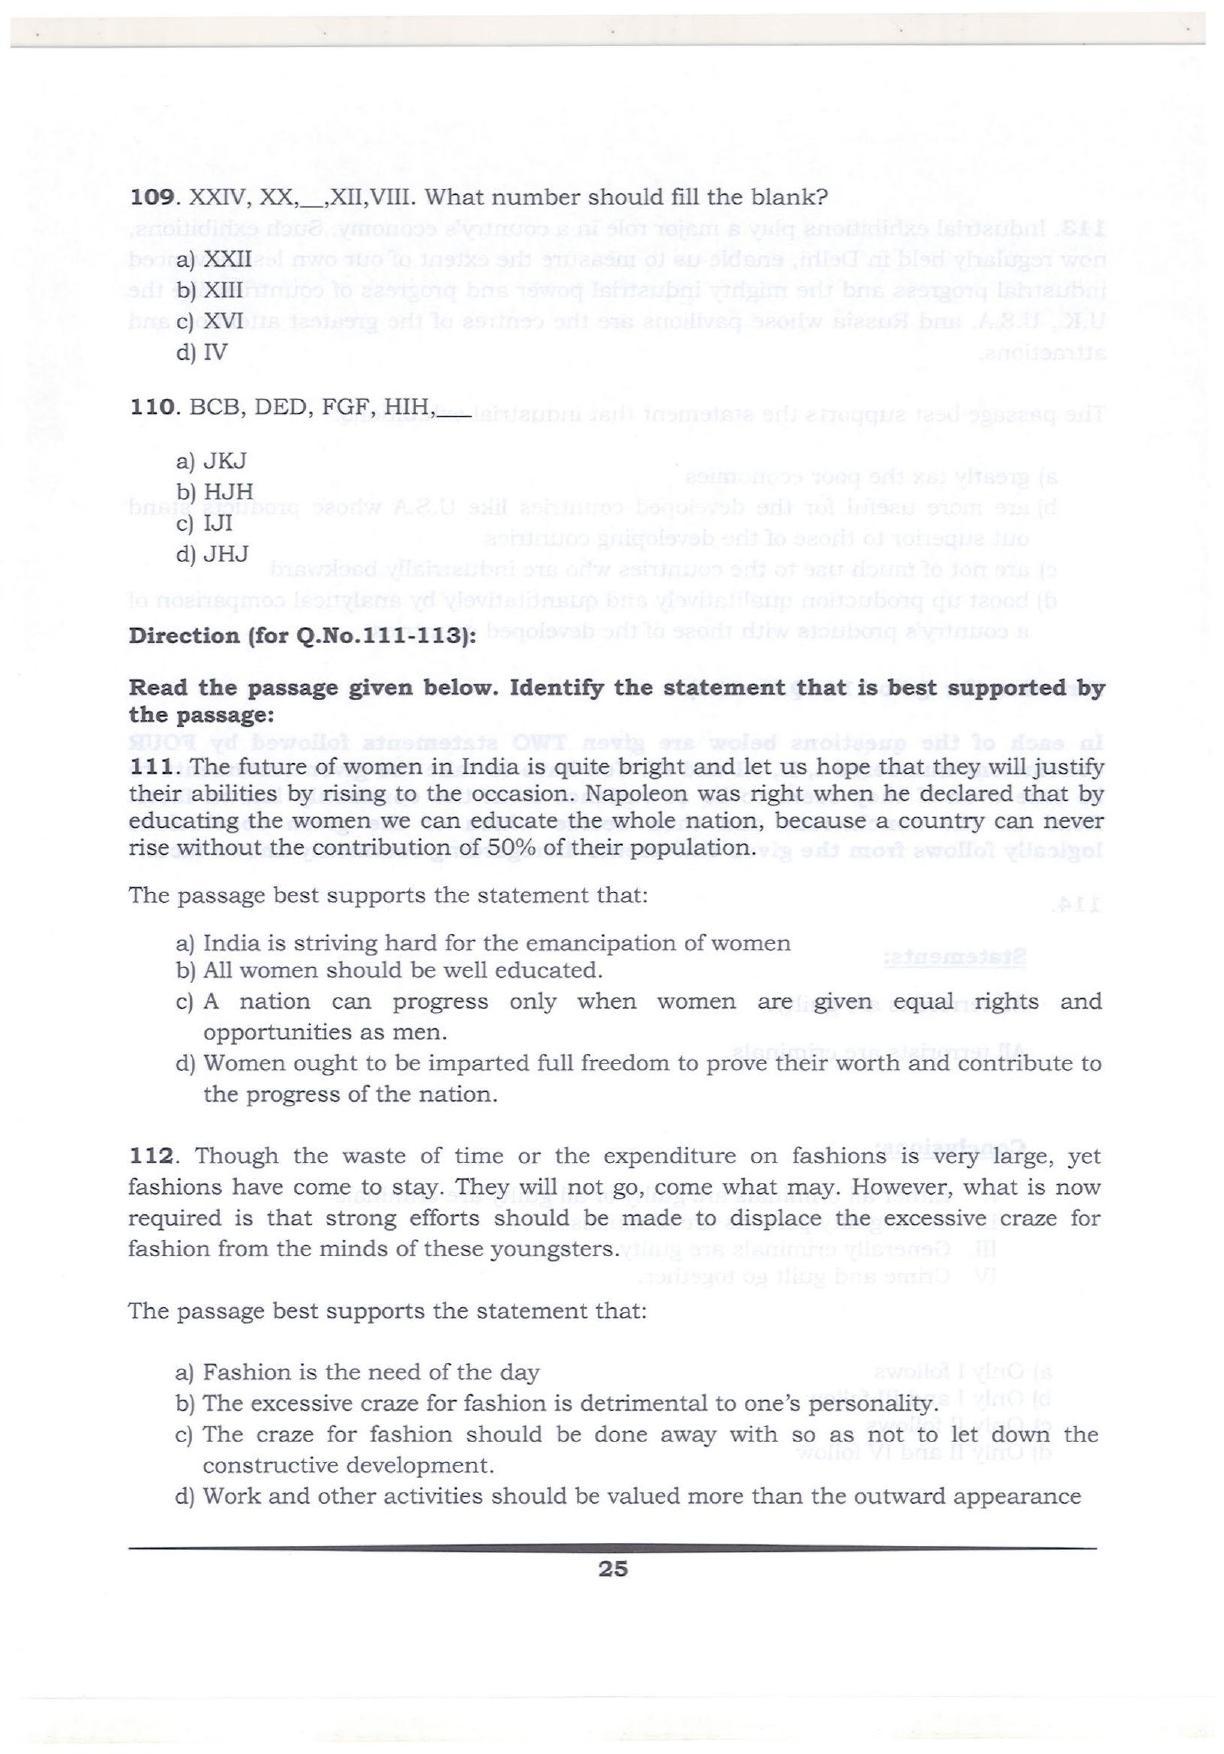 KMAT Question Papers - February 2018 - Page 24